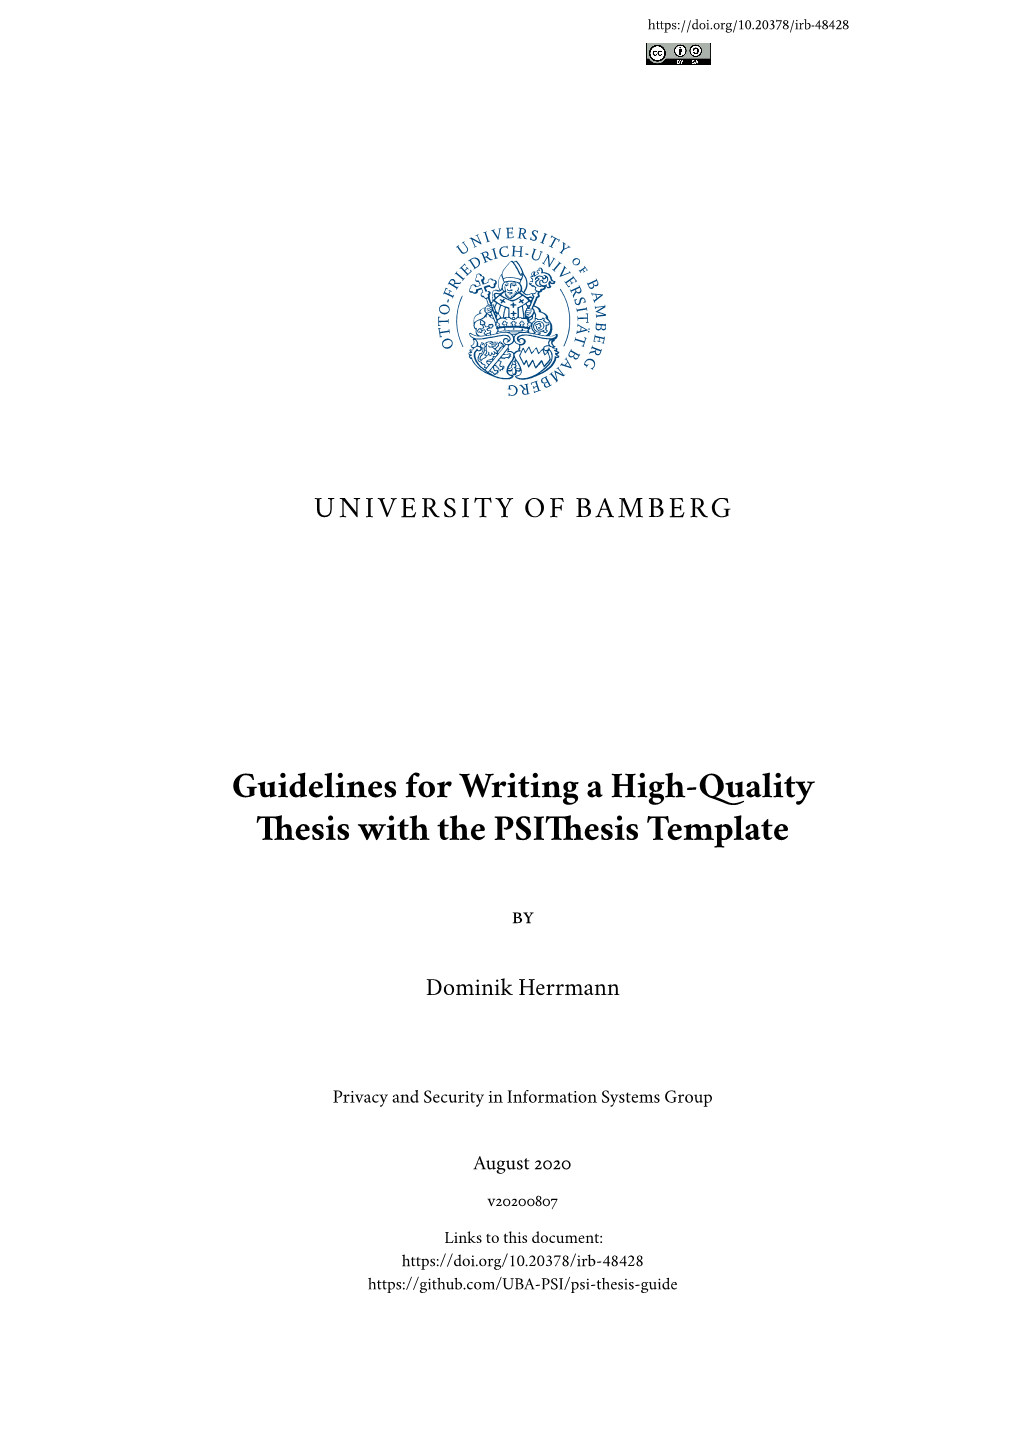 Guidelines for Writing a High-Quality Thesis with the Psithesis Template